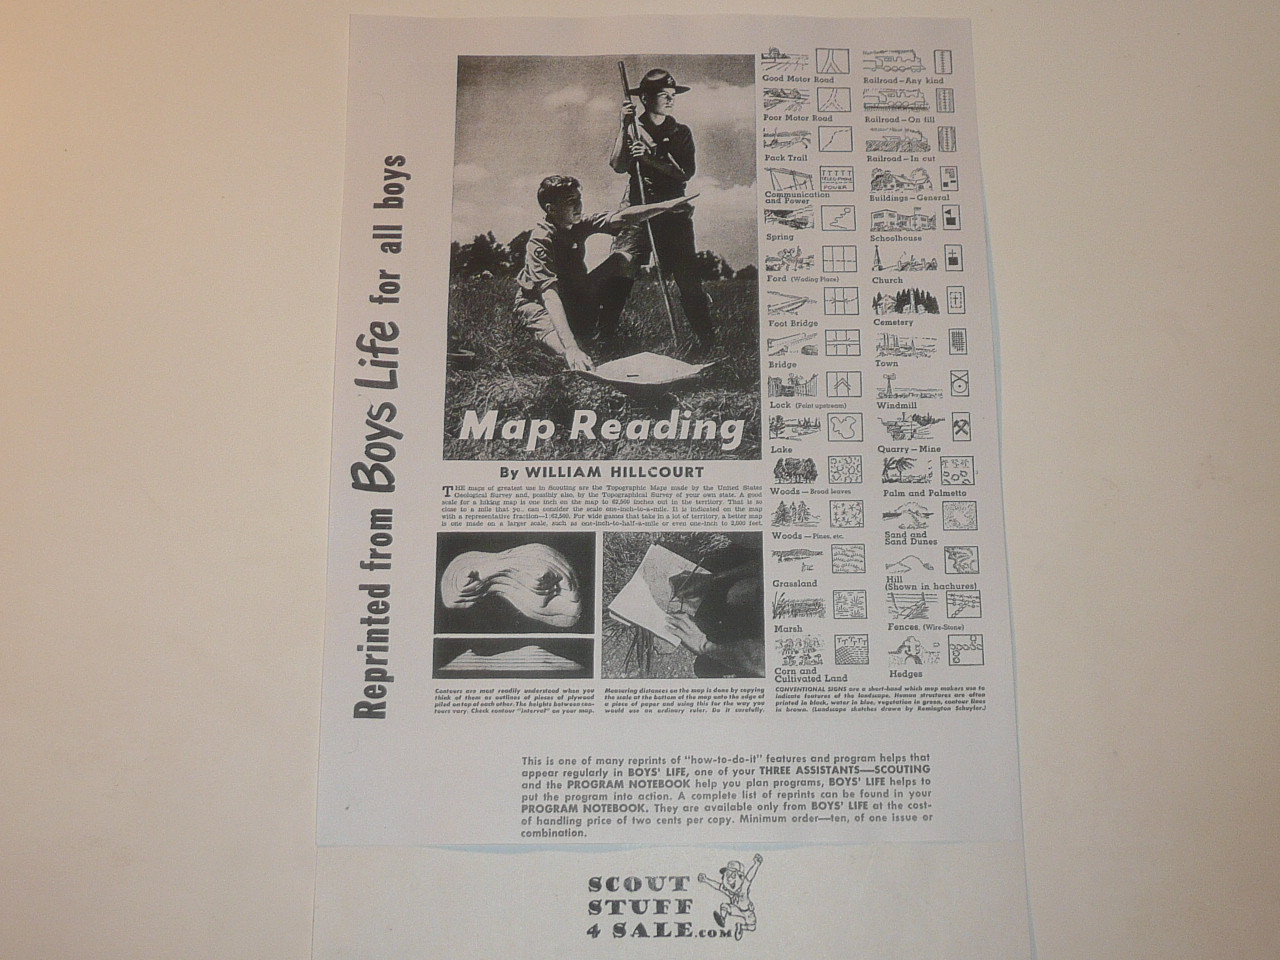 Map Reading, By Green Bar Bill, Boys' Life Single Topic Reprint from the 1950's - 1960's , written for Scouts, great teaching materials